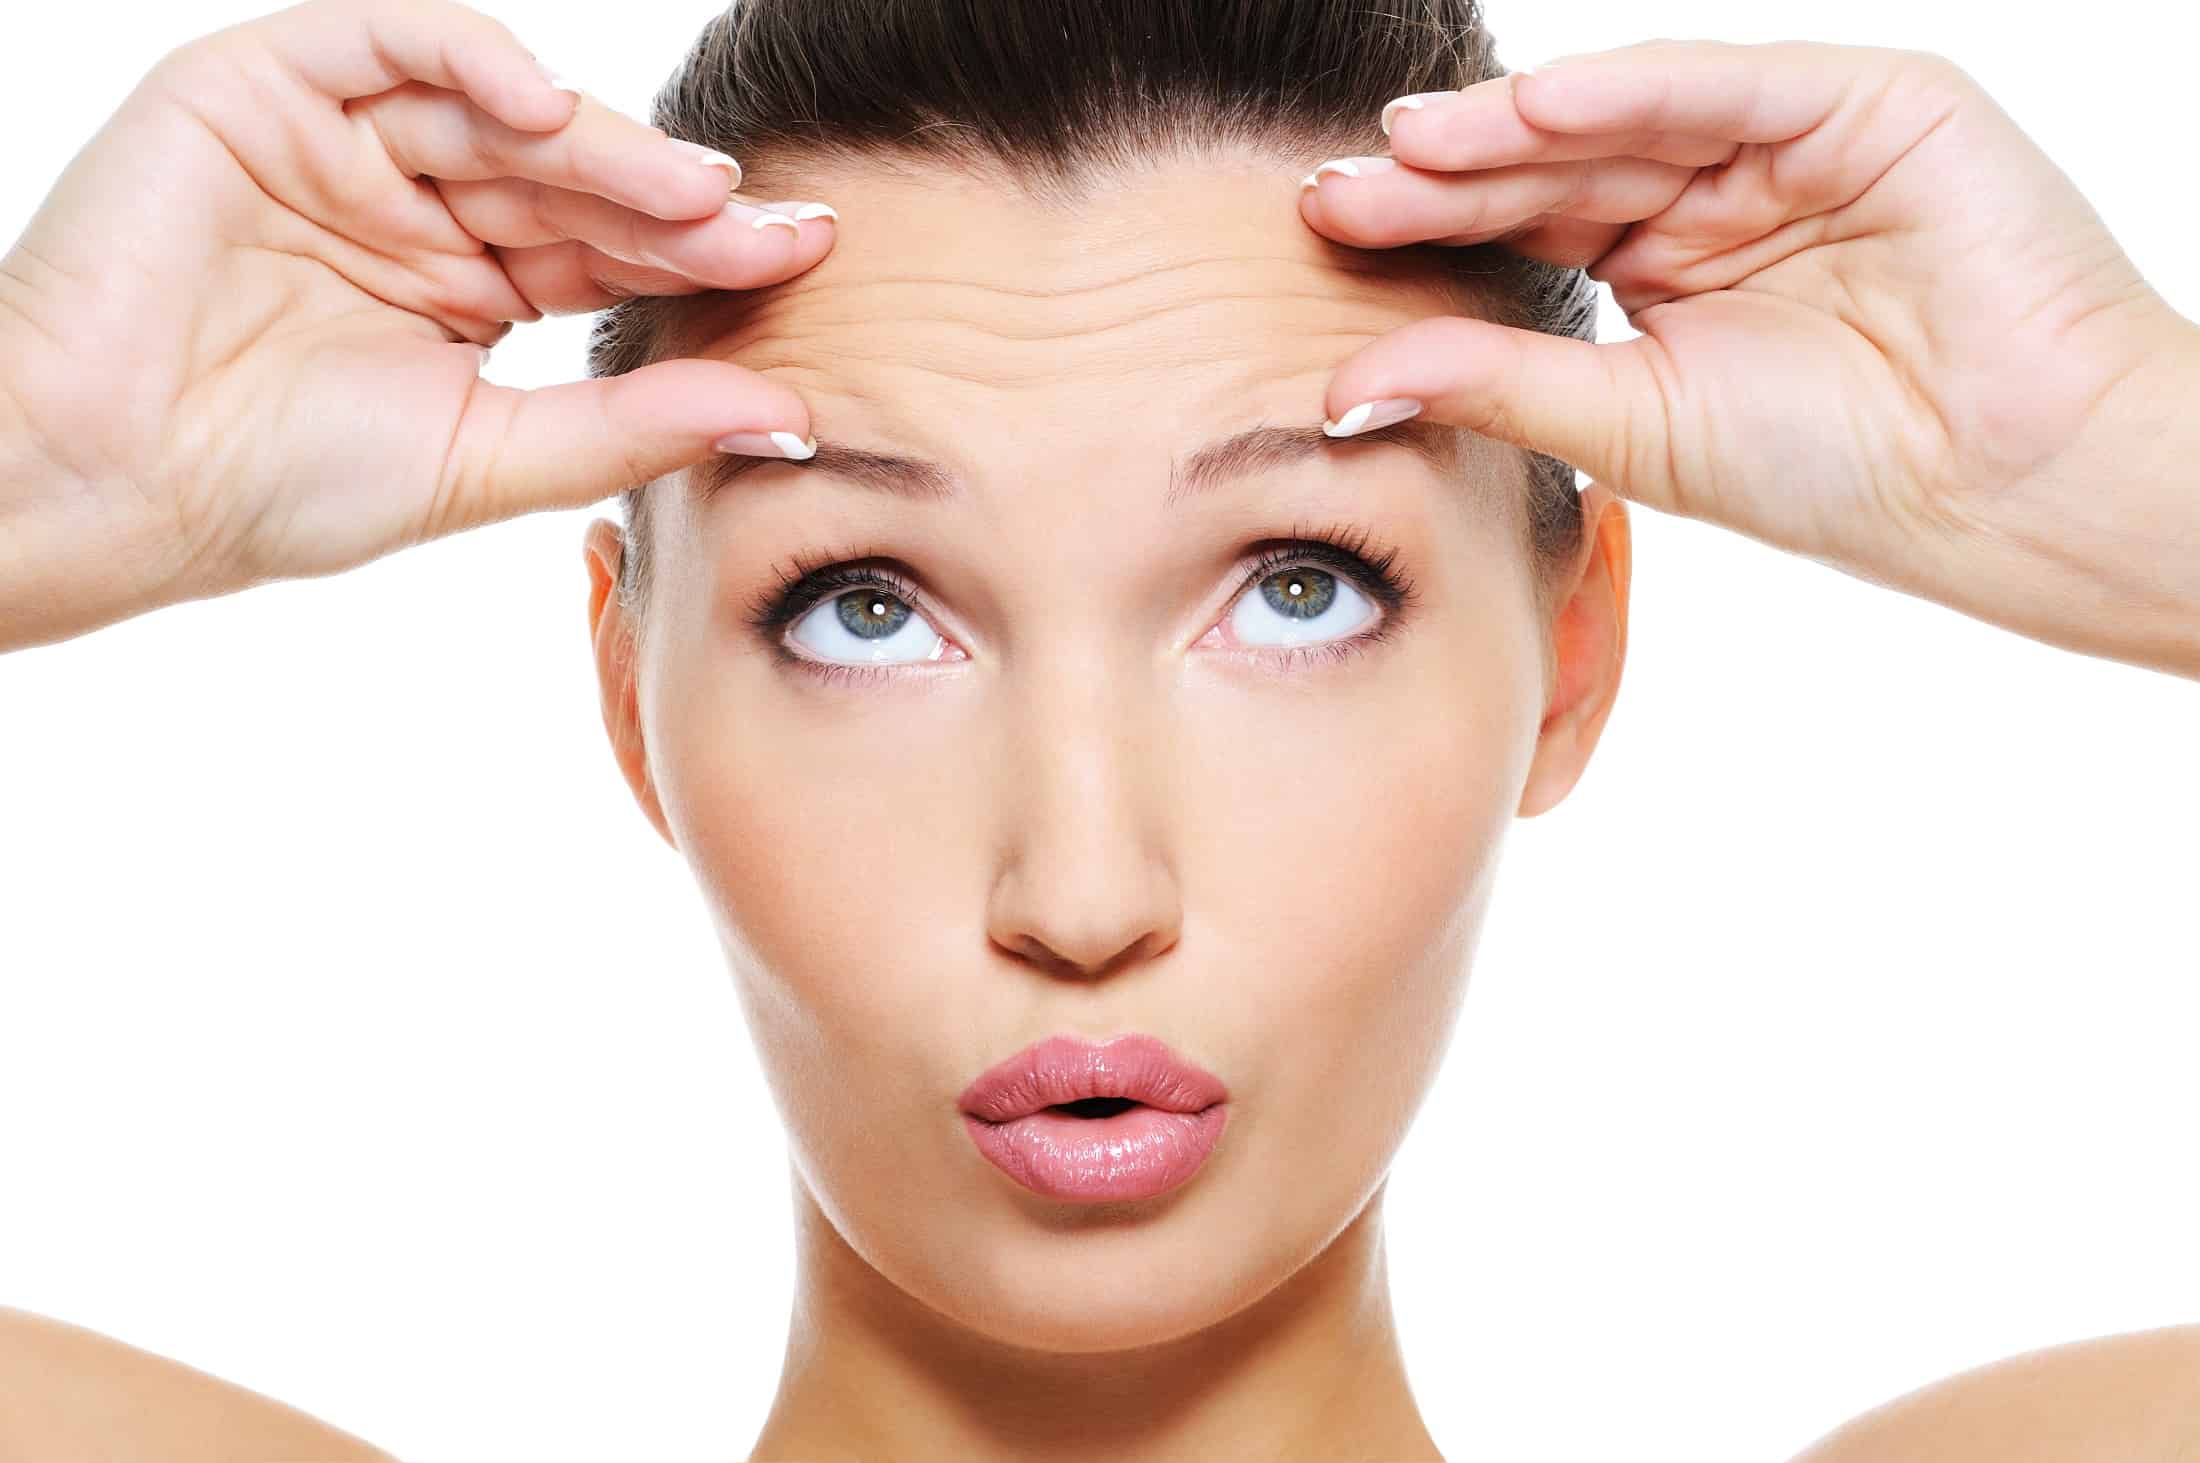 Can you get rid of facial wrinkles without using a needle or scalpel?